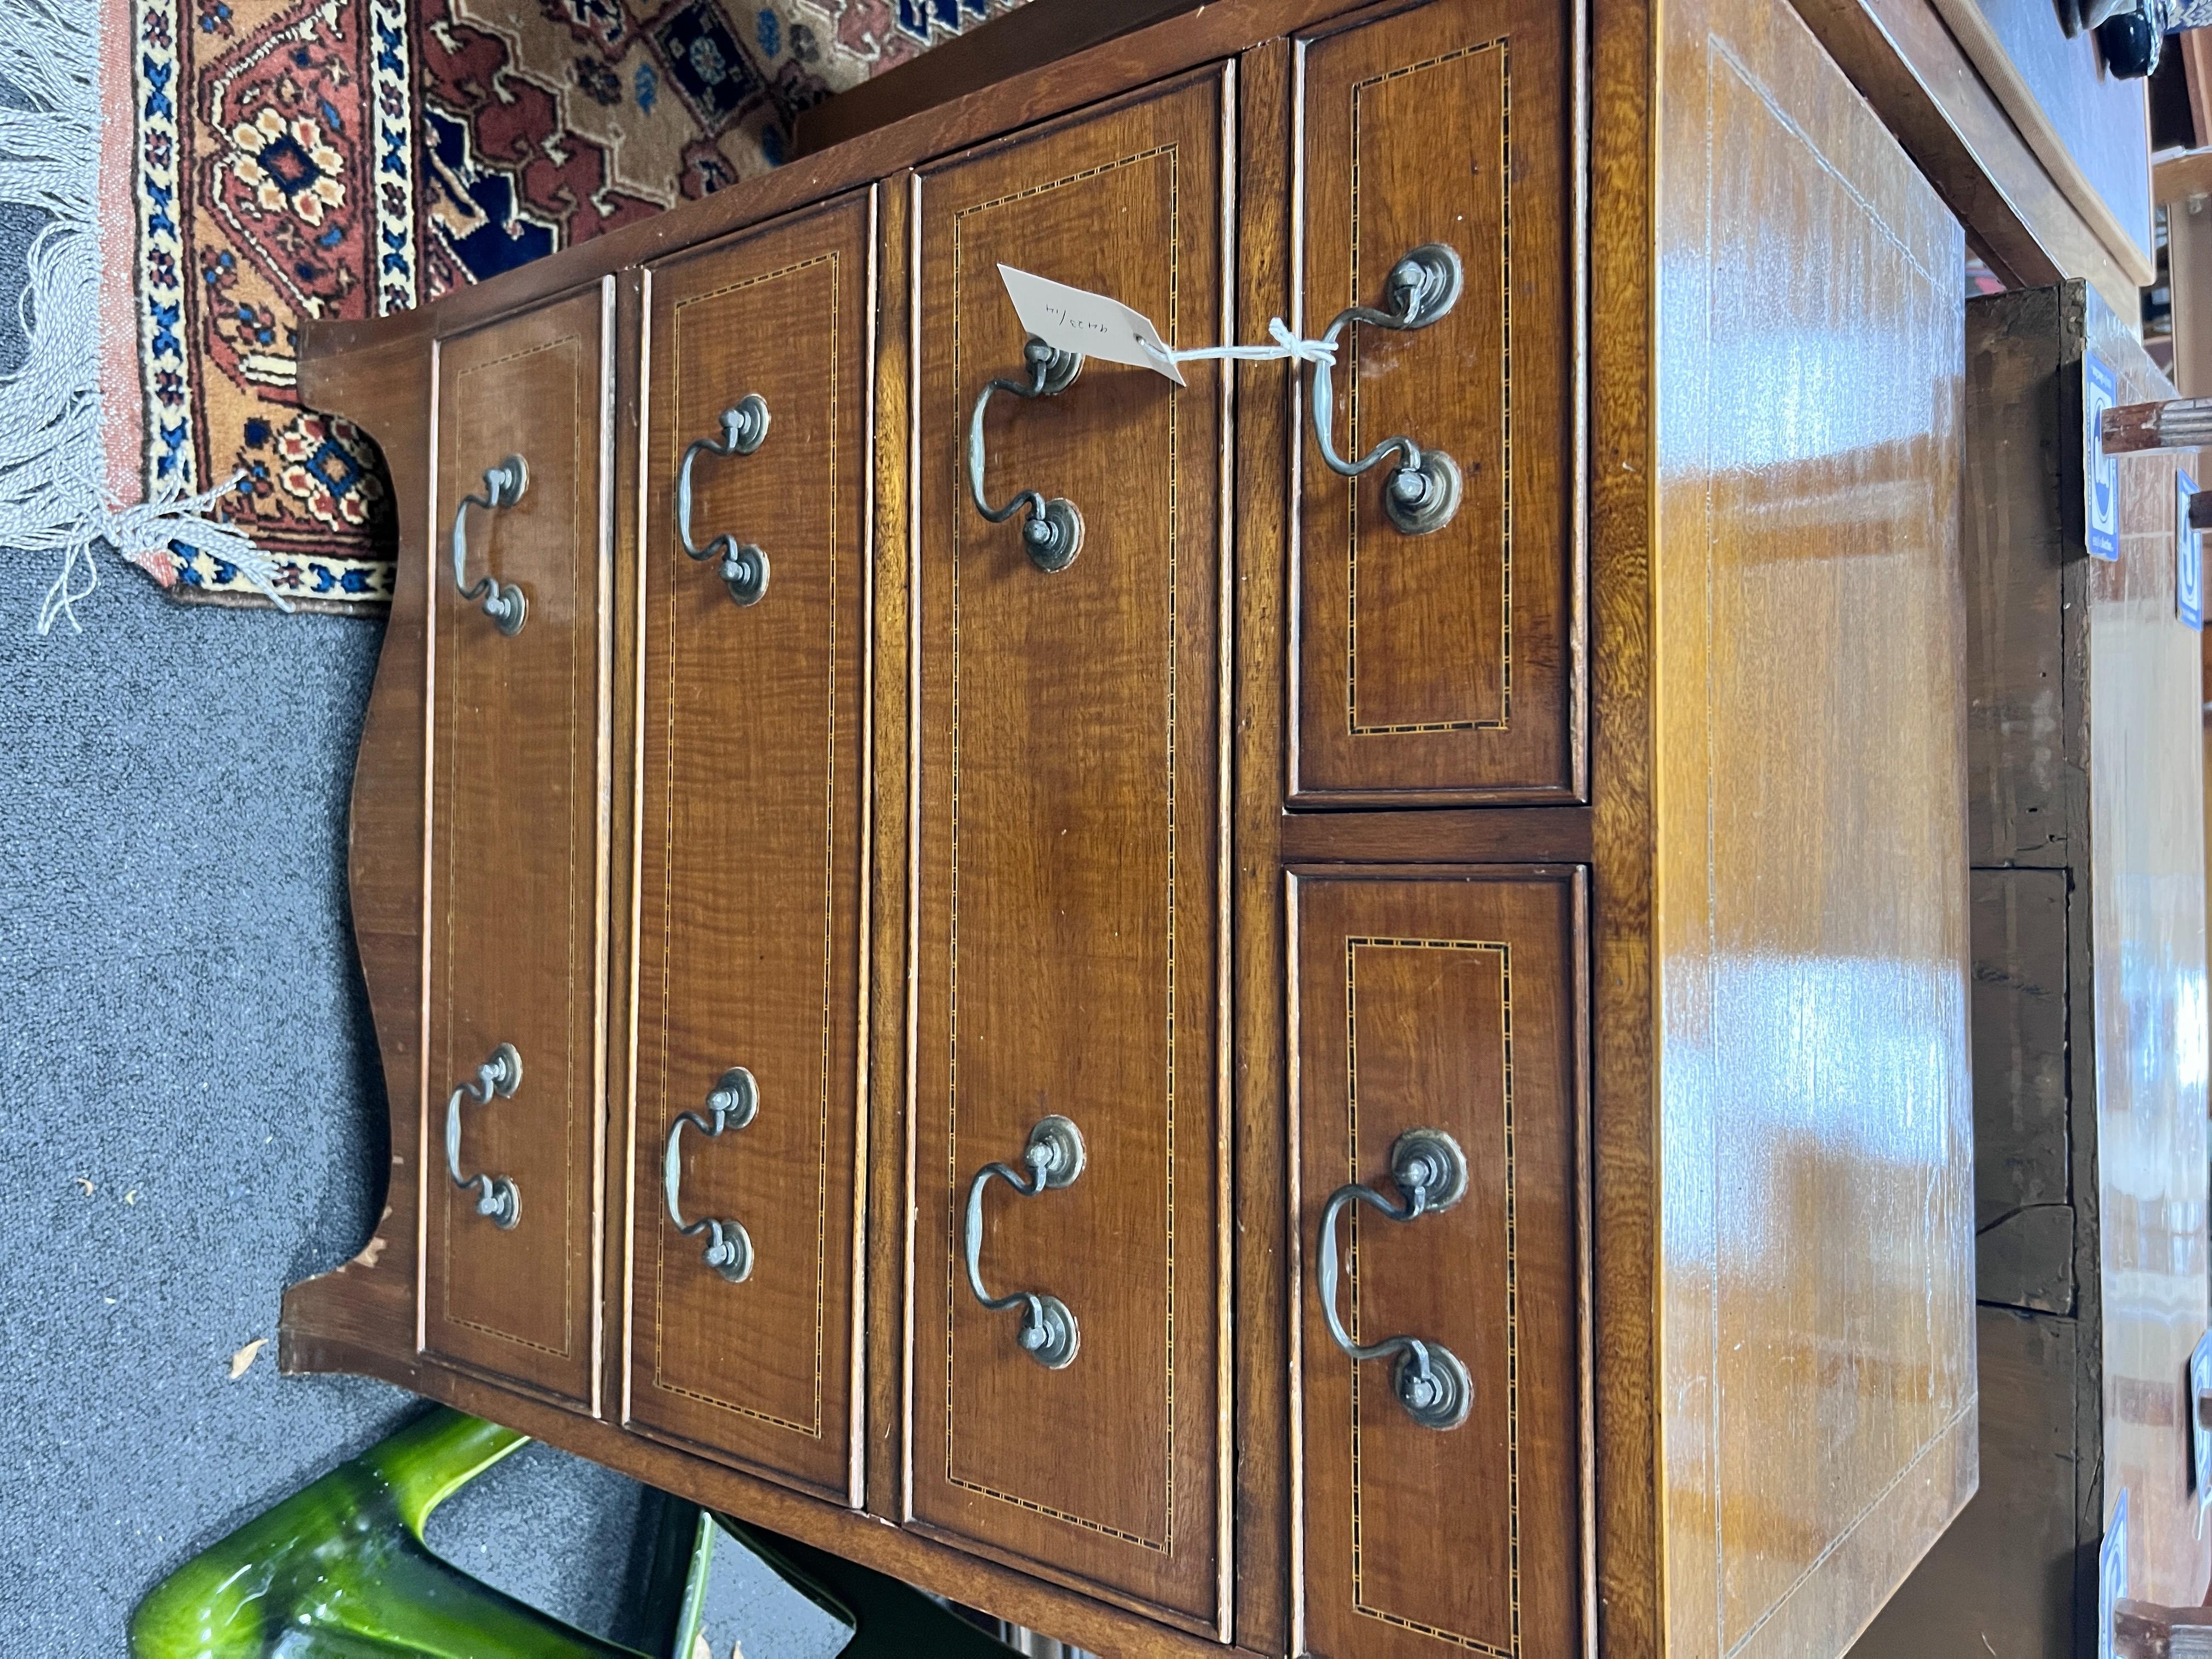 An Edwardian style mahogany five drawer chest, width 57cm *Please note the sale commences at 9am.